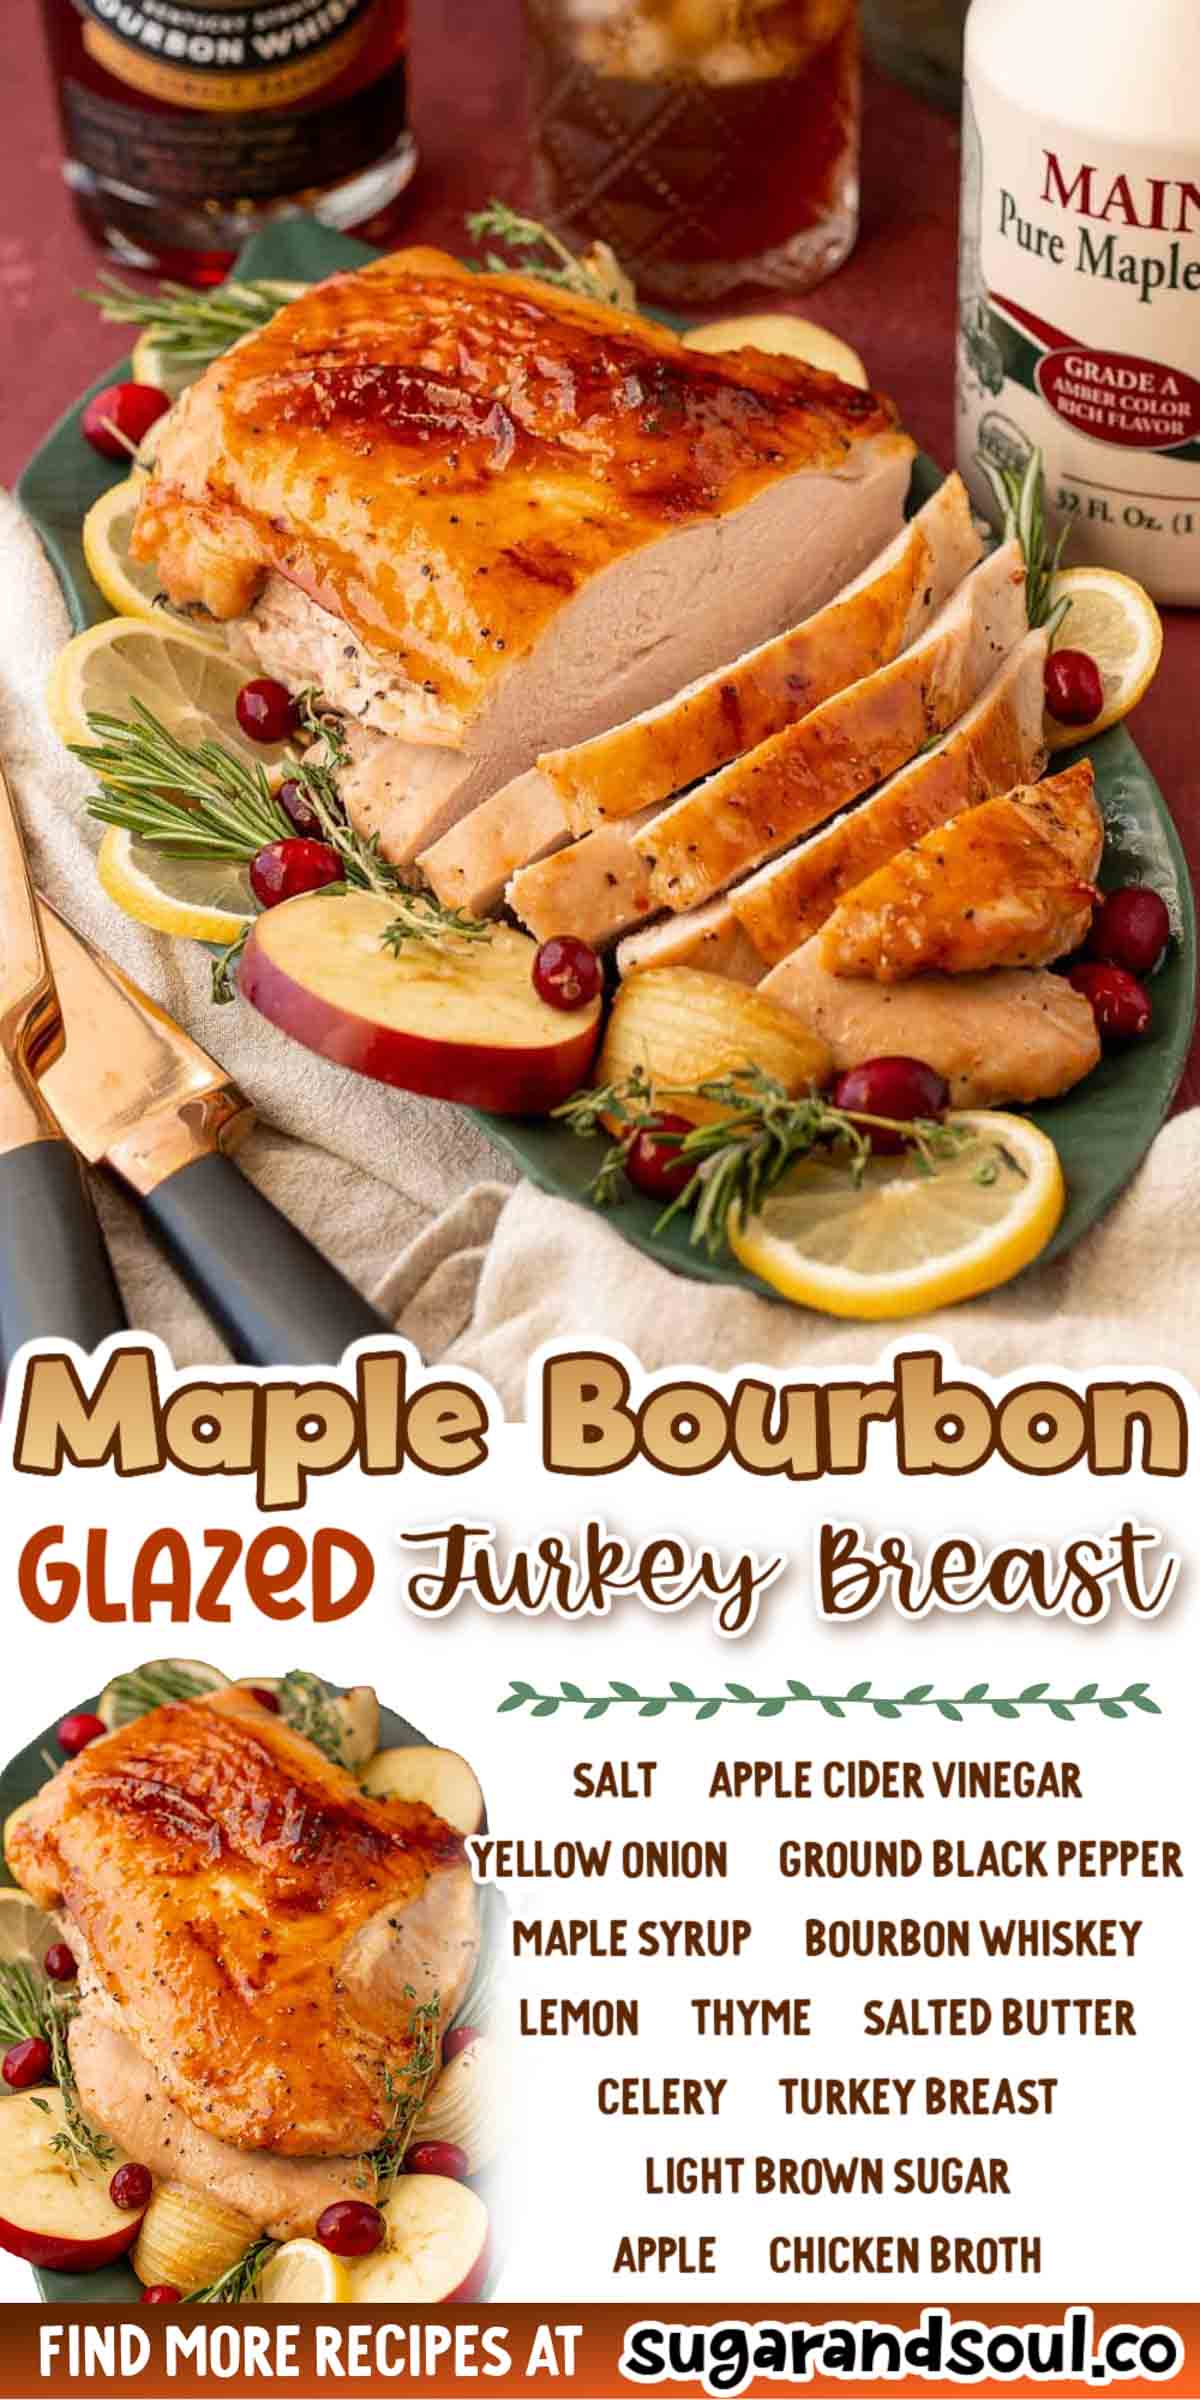 This Maple Bourbon Glazed Turkey Breast Recipe makes a moist, juicy turkey that's bursting with delicious smoky, sweet flavor in every bite! A great choice for the holidays! via @sugarandsoulco